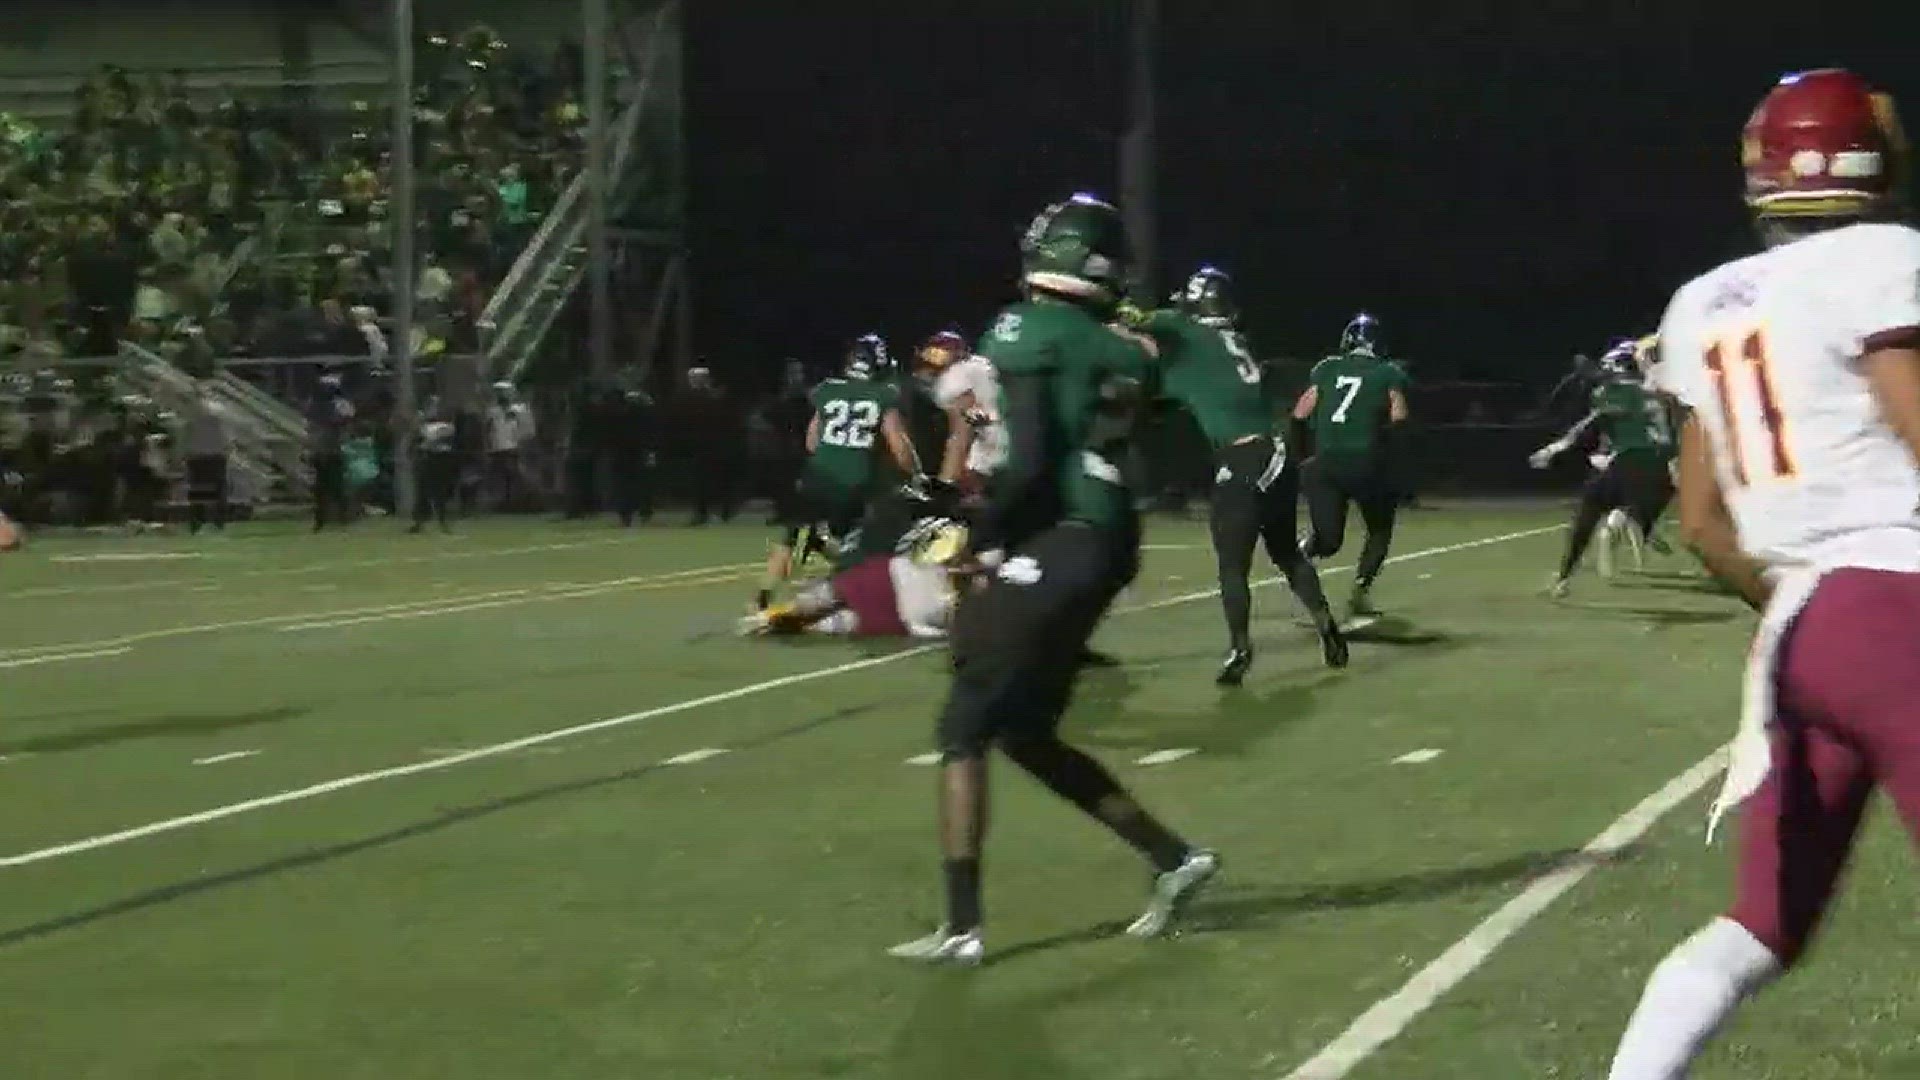 Highlights of No. 10 Central Catholic's 28-24 over No. 7 Sheldon in the second round of the playoffs on Nov. 10, 2017. Highlights courtesy of KEZI.